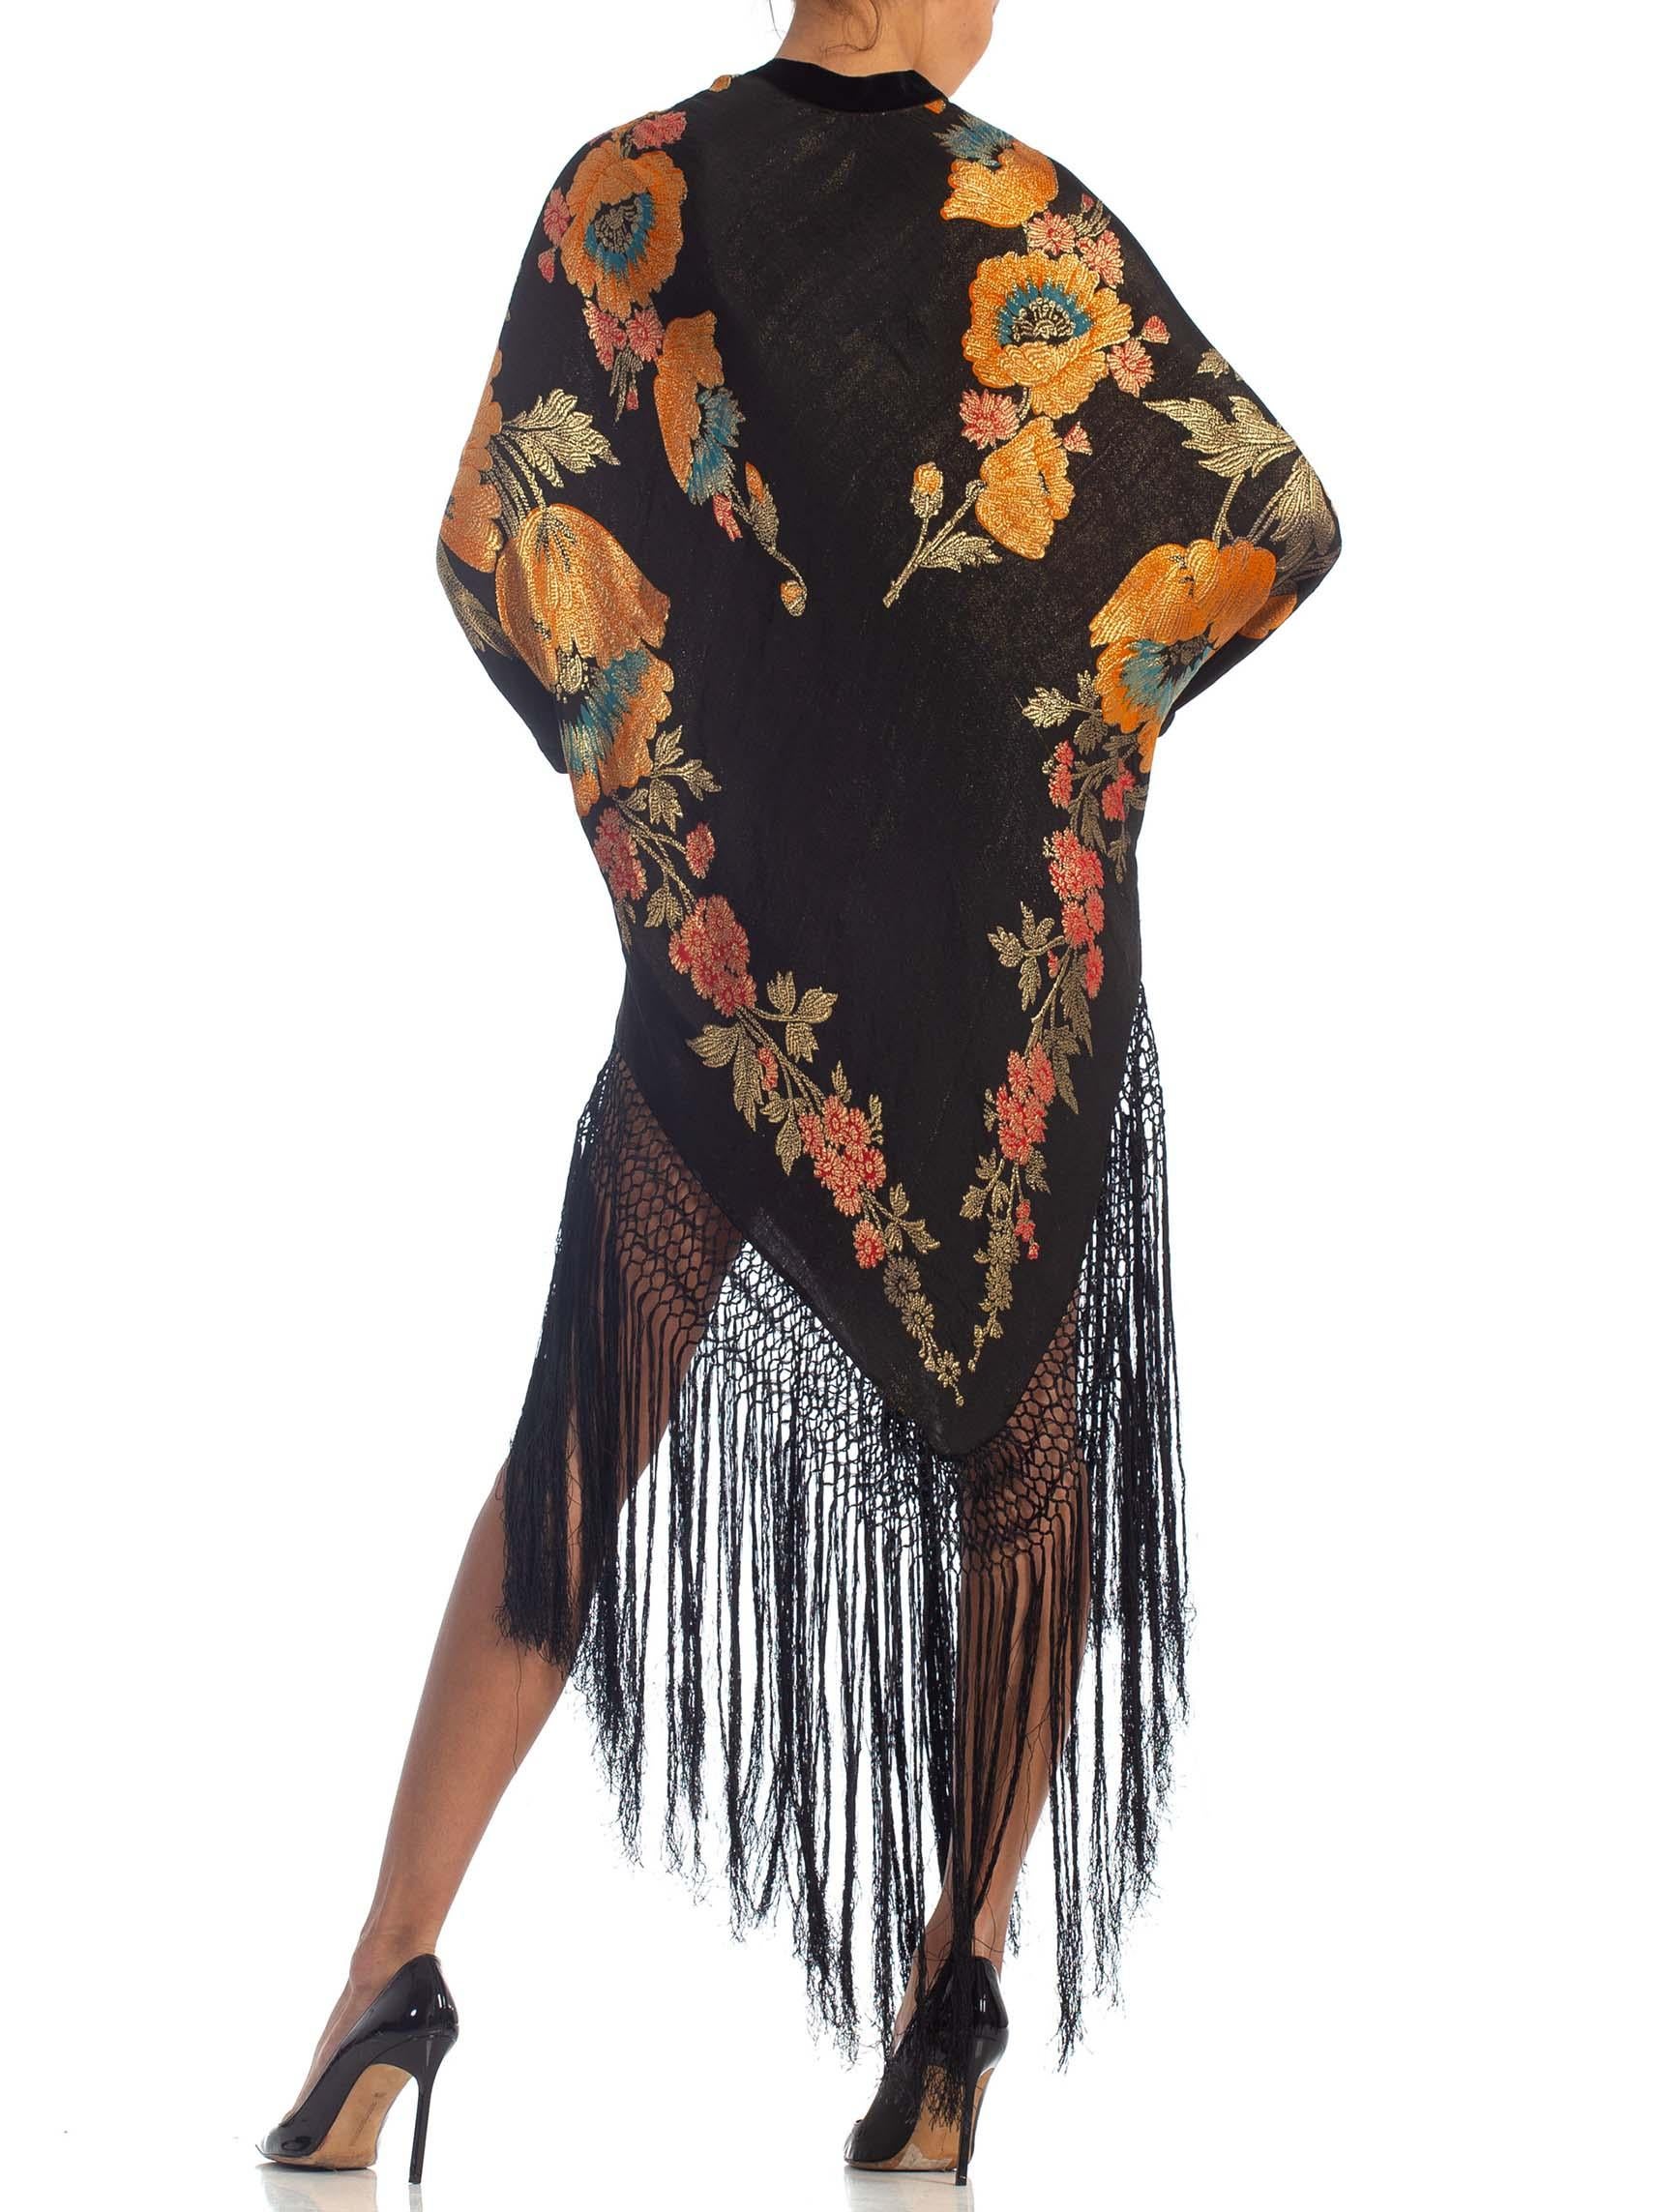 MORPHEW COLLECTION Floral Gold Lamé Silk Tunic Dress With Fringe 4